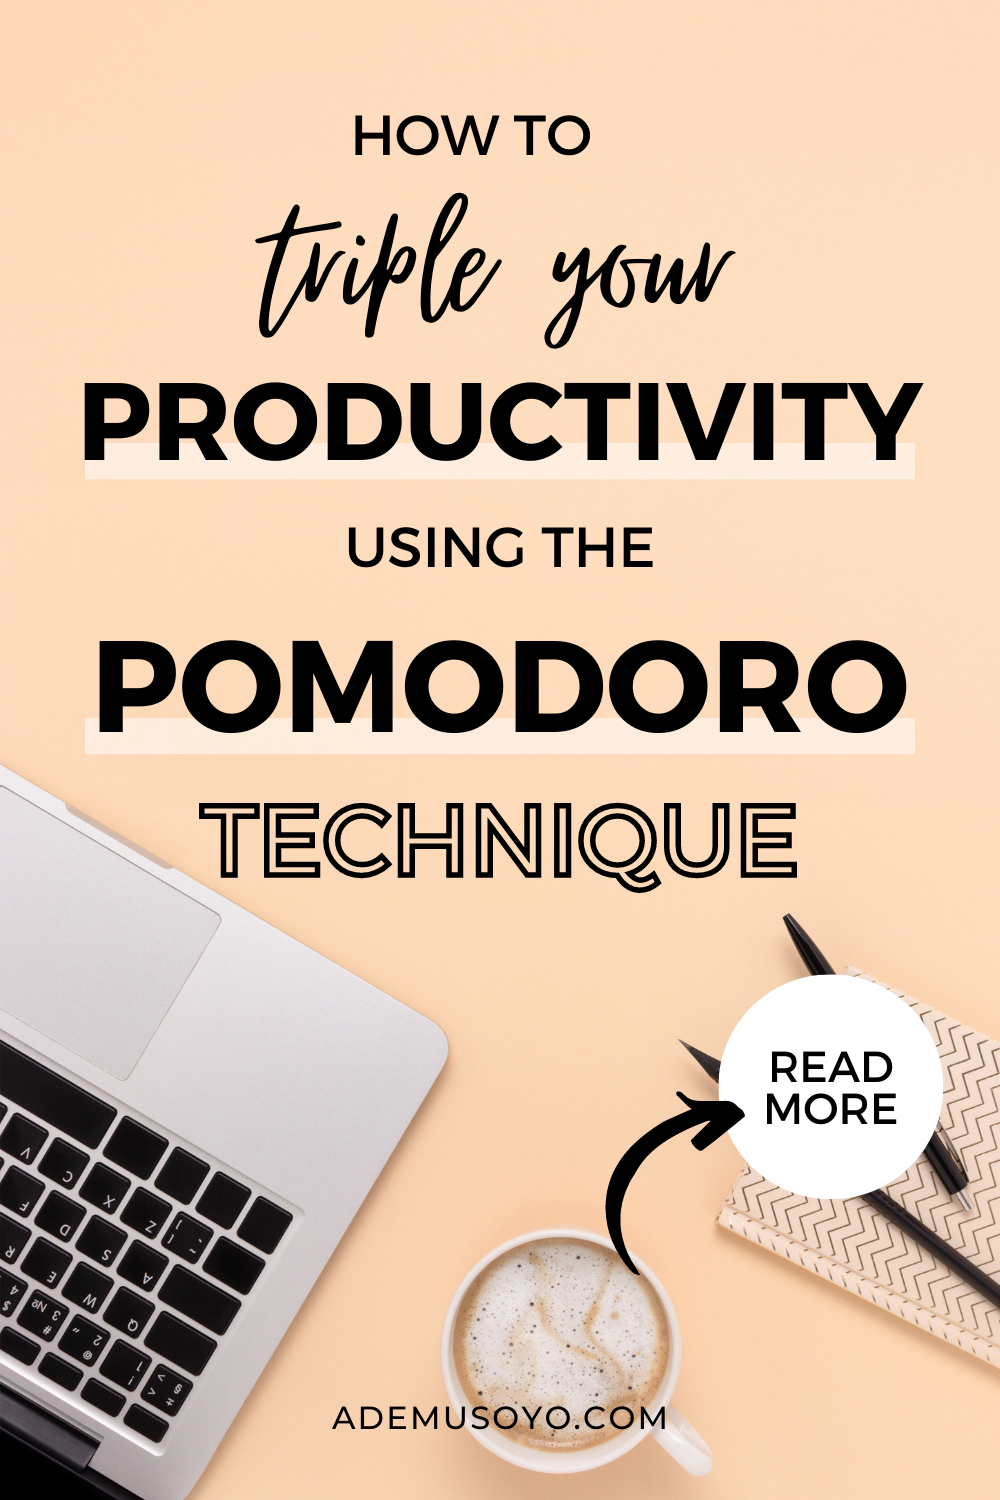 Want to improve your productivity? Discover the Pomodoro Technique—the ultimate productivity game-changer! Triple your efficiency with focused work intervals and strategic breaks. Unleash your full potential today! Learn how to use the Pomodoro Technique & other productivity hacks to improve your time management skills in this article. Learn more at ademusoyo.com.